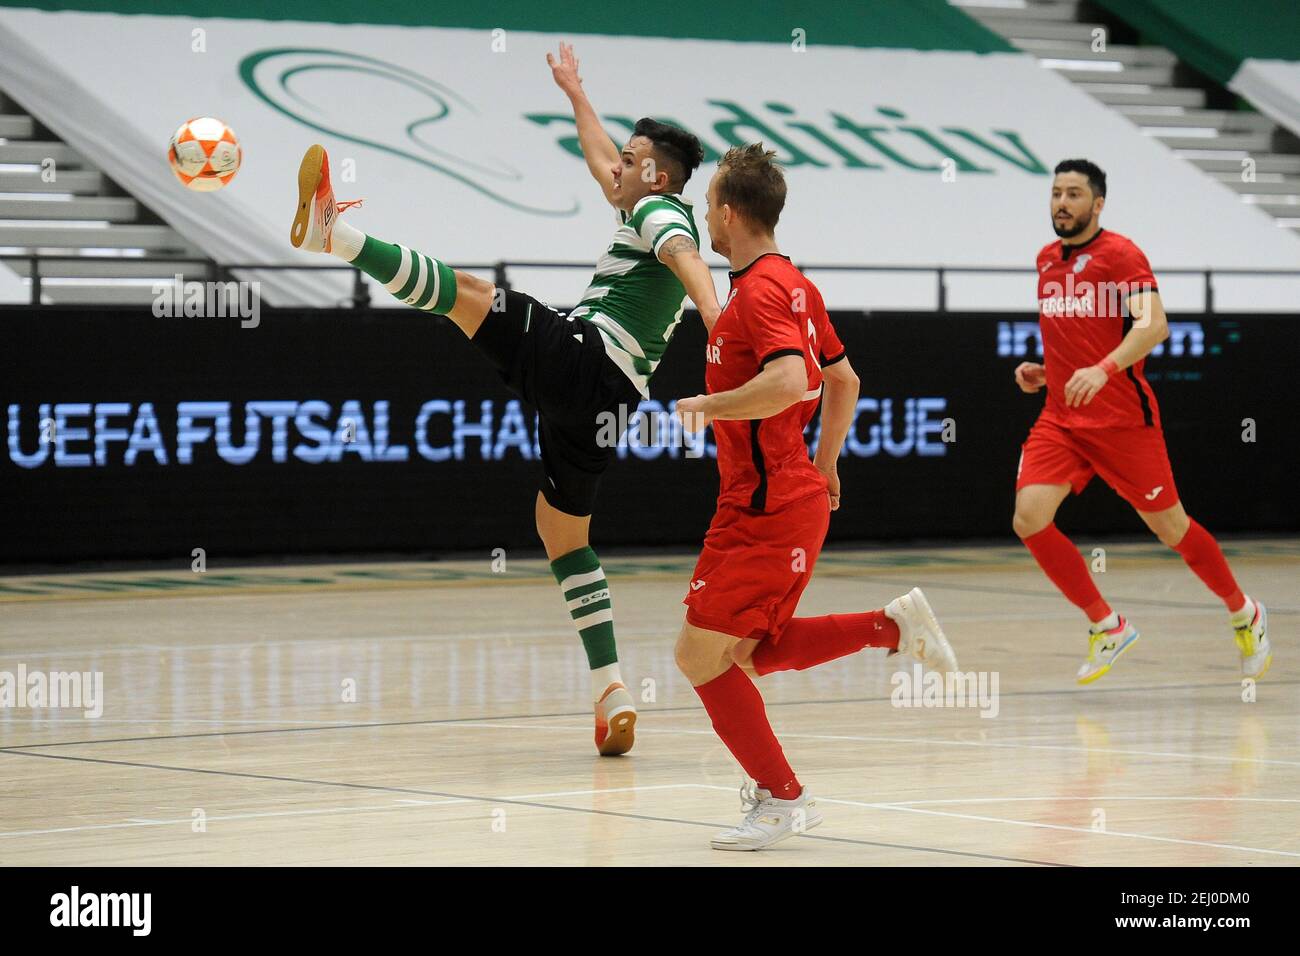 Lisbon, 02/20/2021 - Sporting CP hosted this afternoon Chrudim at Pavilhão  João Rocha, in a game counting for the round of 16 of the UEFA Futsal  Champions League 2020/21. Rocha (Ã lvaro